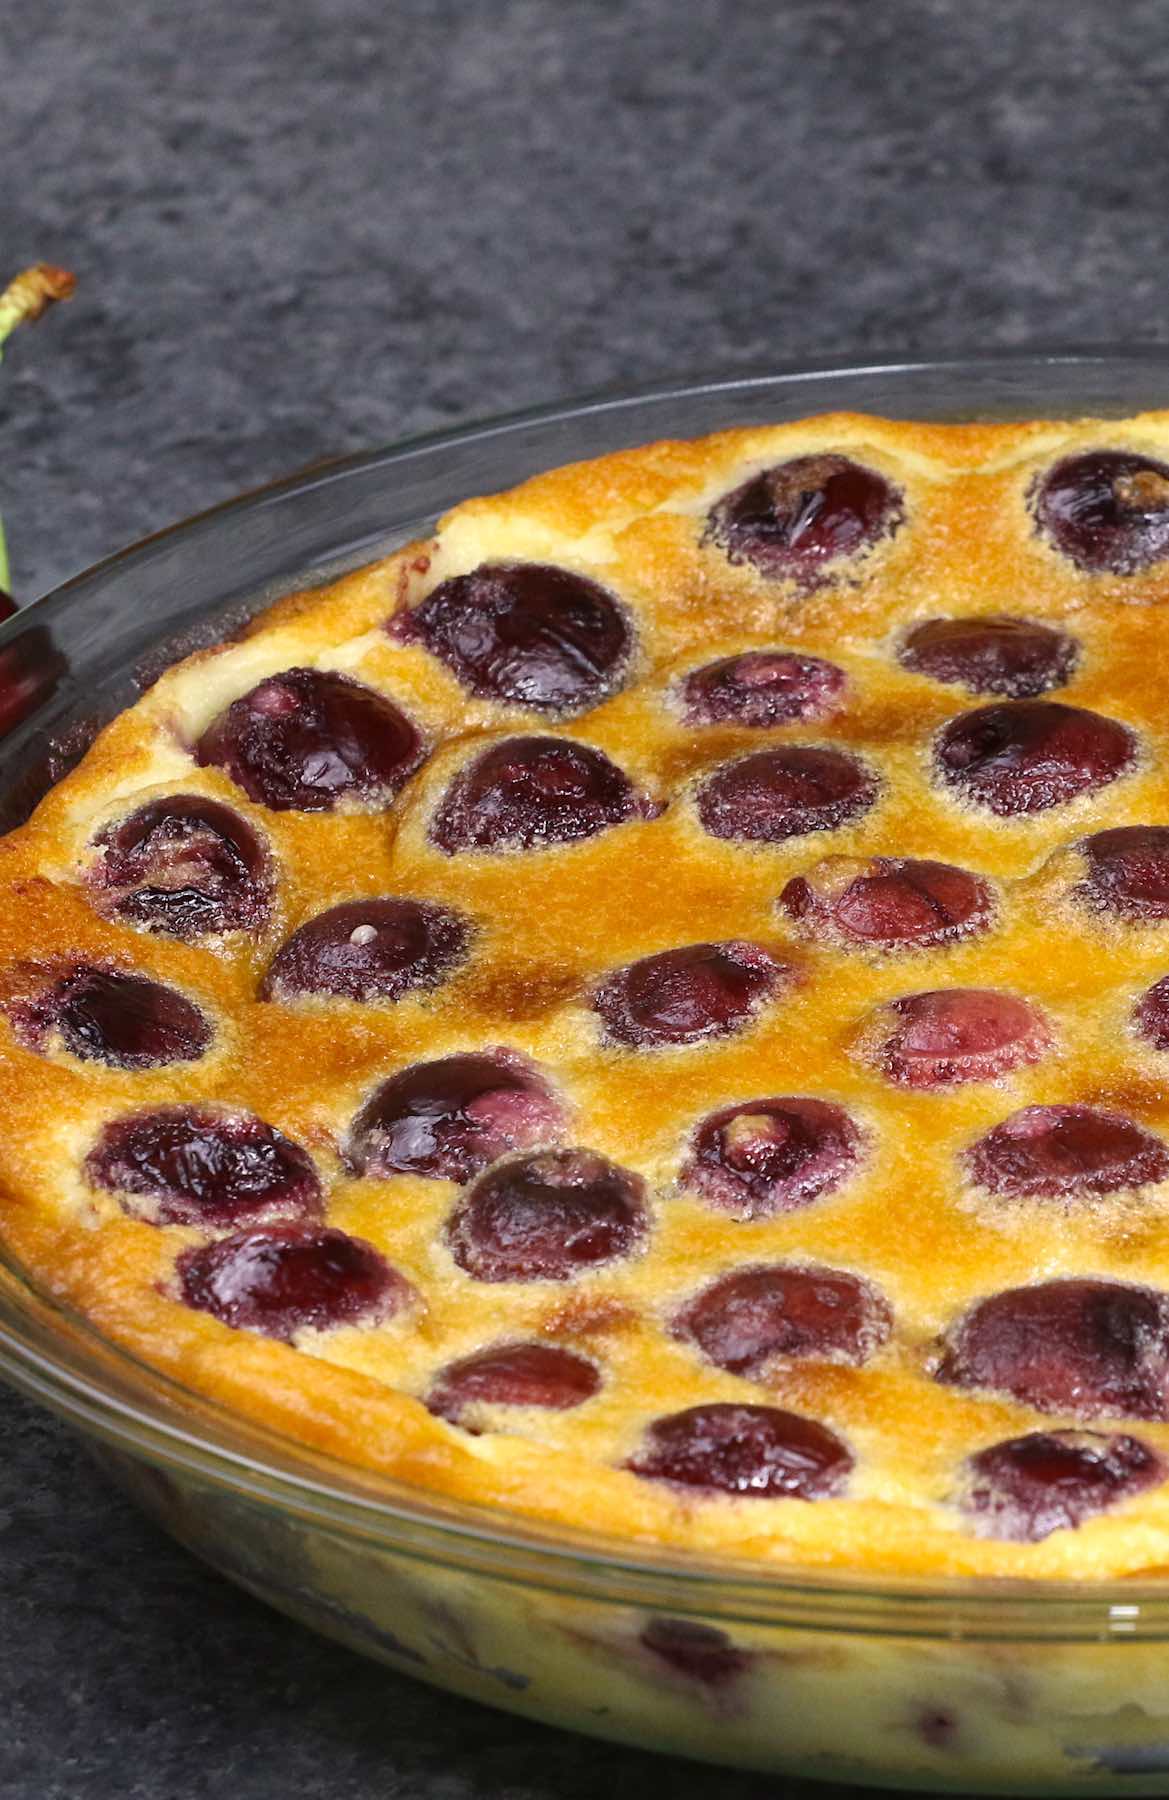 Closeup of a baked clafoutis aux cerises when done, showing the golden surface of the custard interspersed with cherries